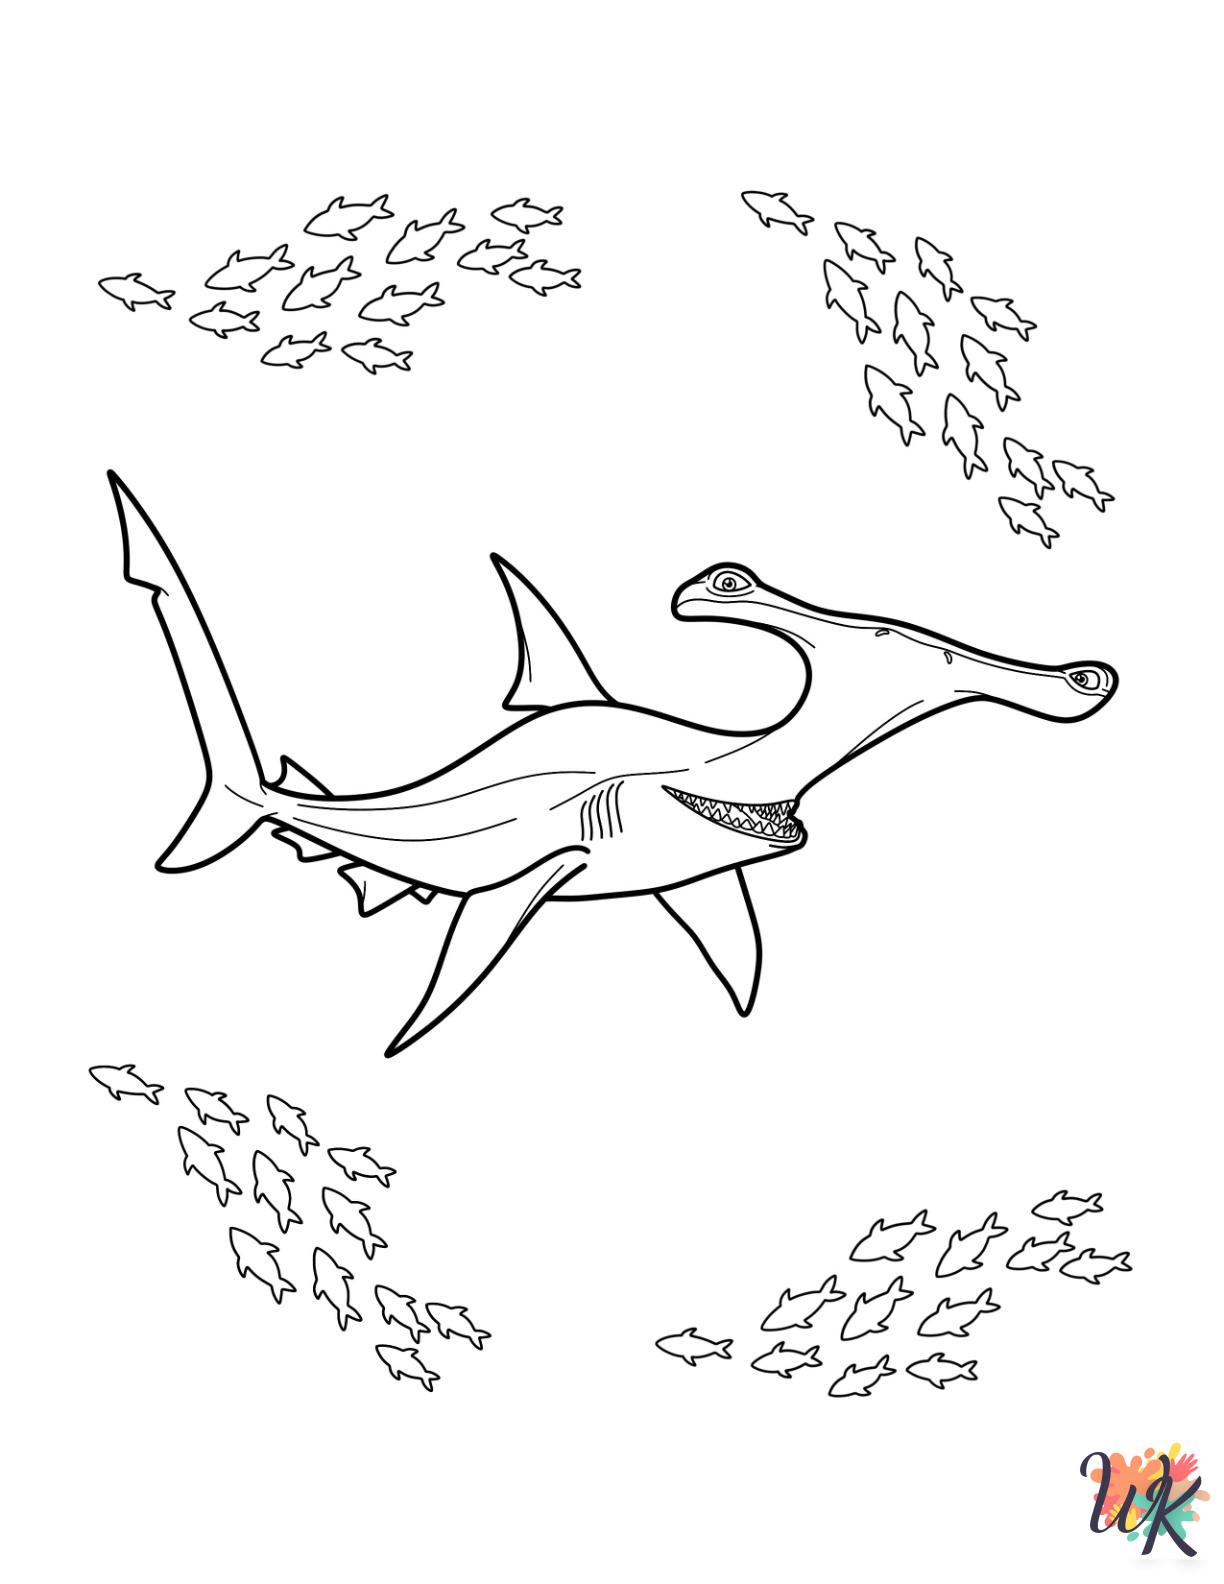 Hammerhead Shark decorations coloring pages